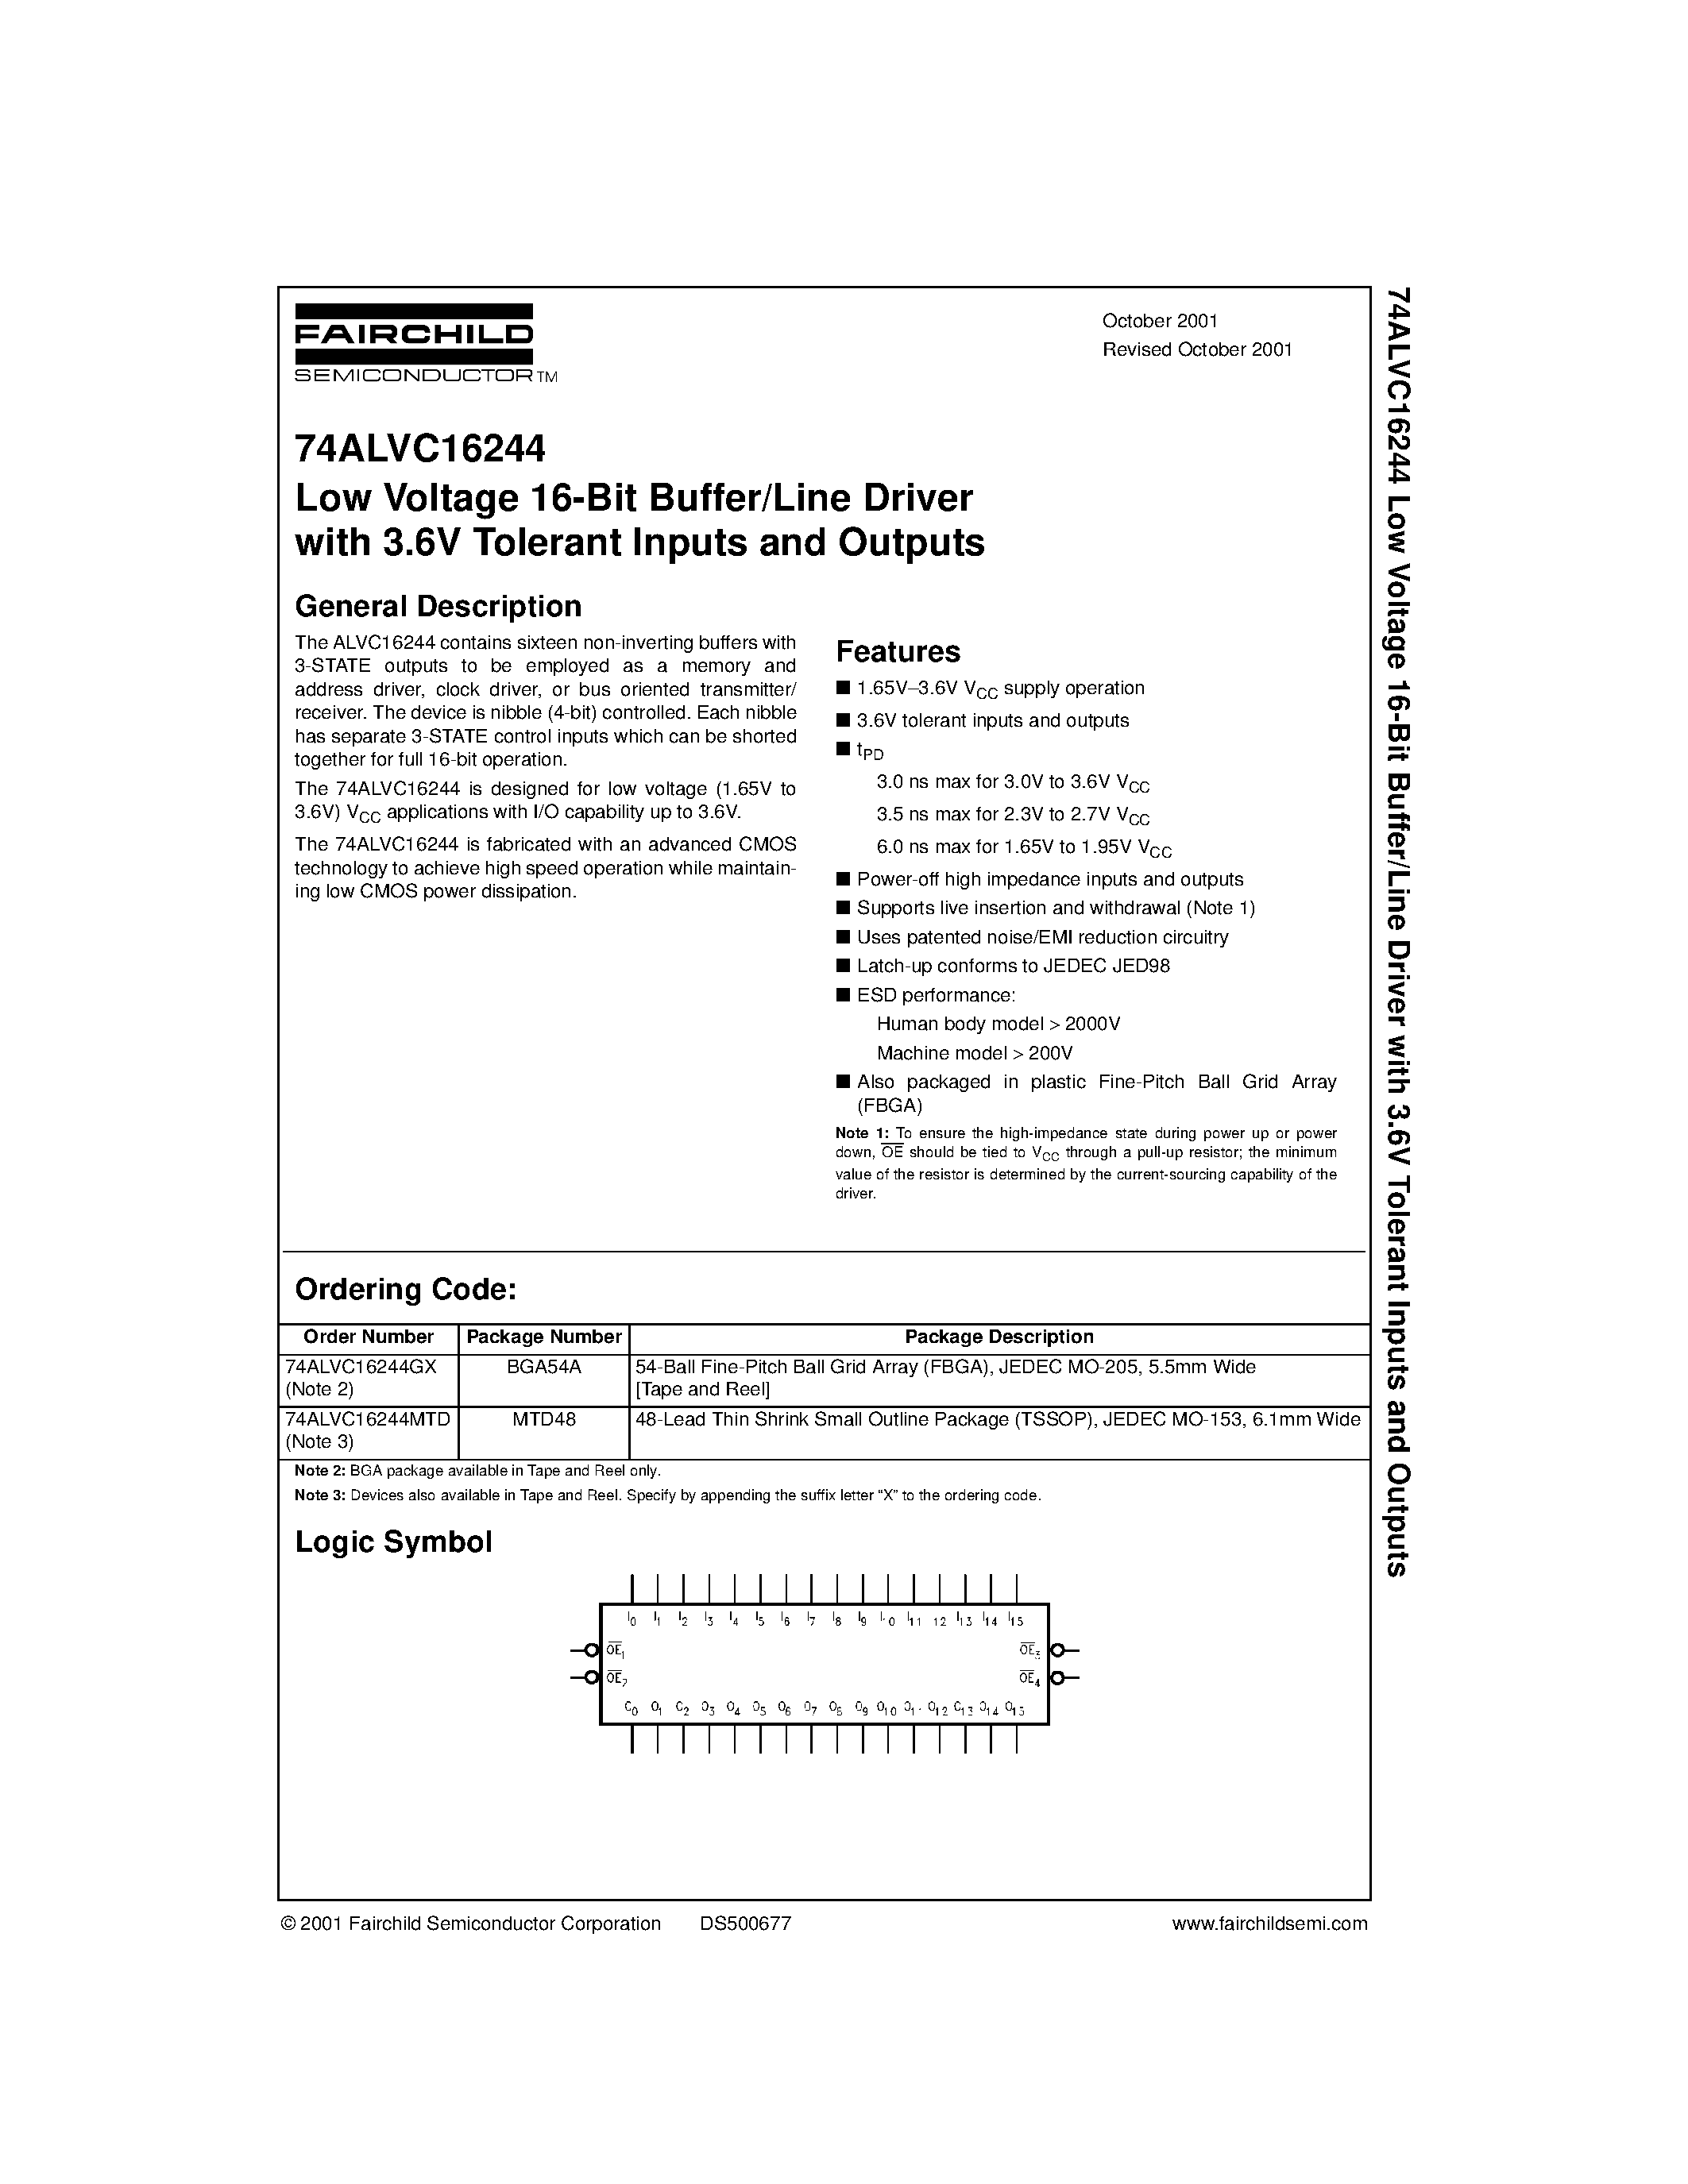 Datasheet 74ALVC16244GX - Low Voltage 16-Bit Buffer/Line Driver with 3.6V Tolerant Inputs and Outputs page 1